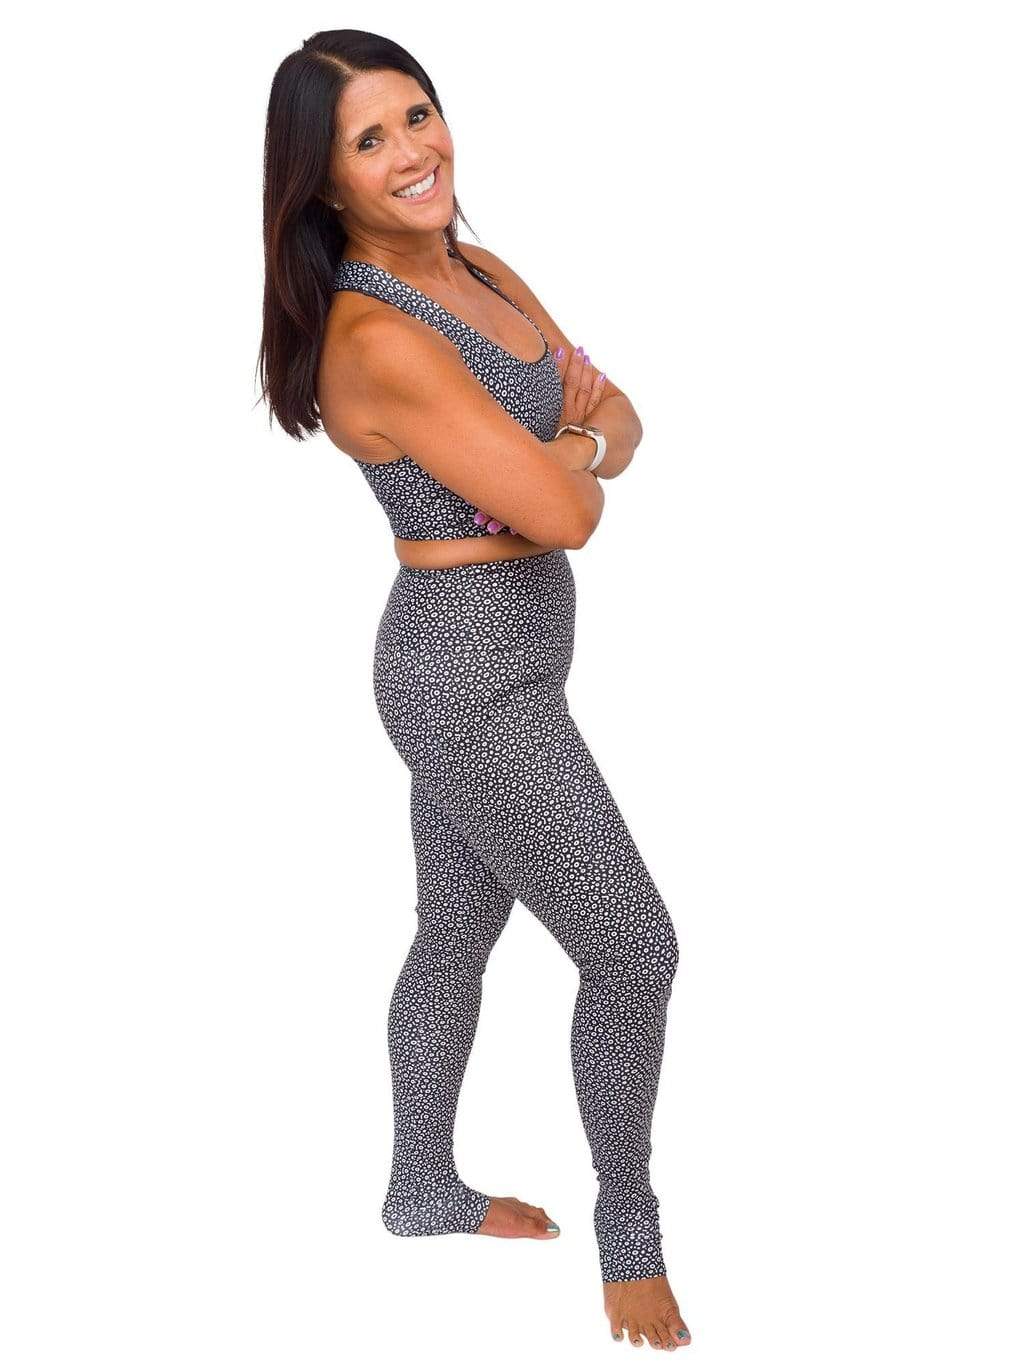 Model: Donna is a yoga teacher whose goal is to empower her students by using yoga to create deeper connections with themselves and with nature. She is 5&#39;2&quot;, 125 lbs, 34B and is wearing a S top and legging.